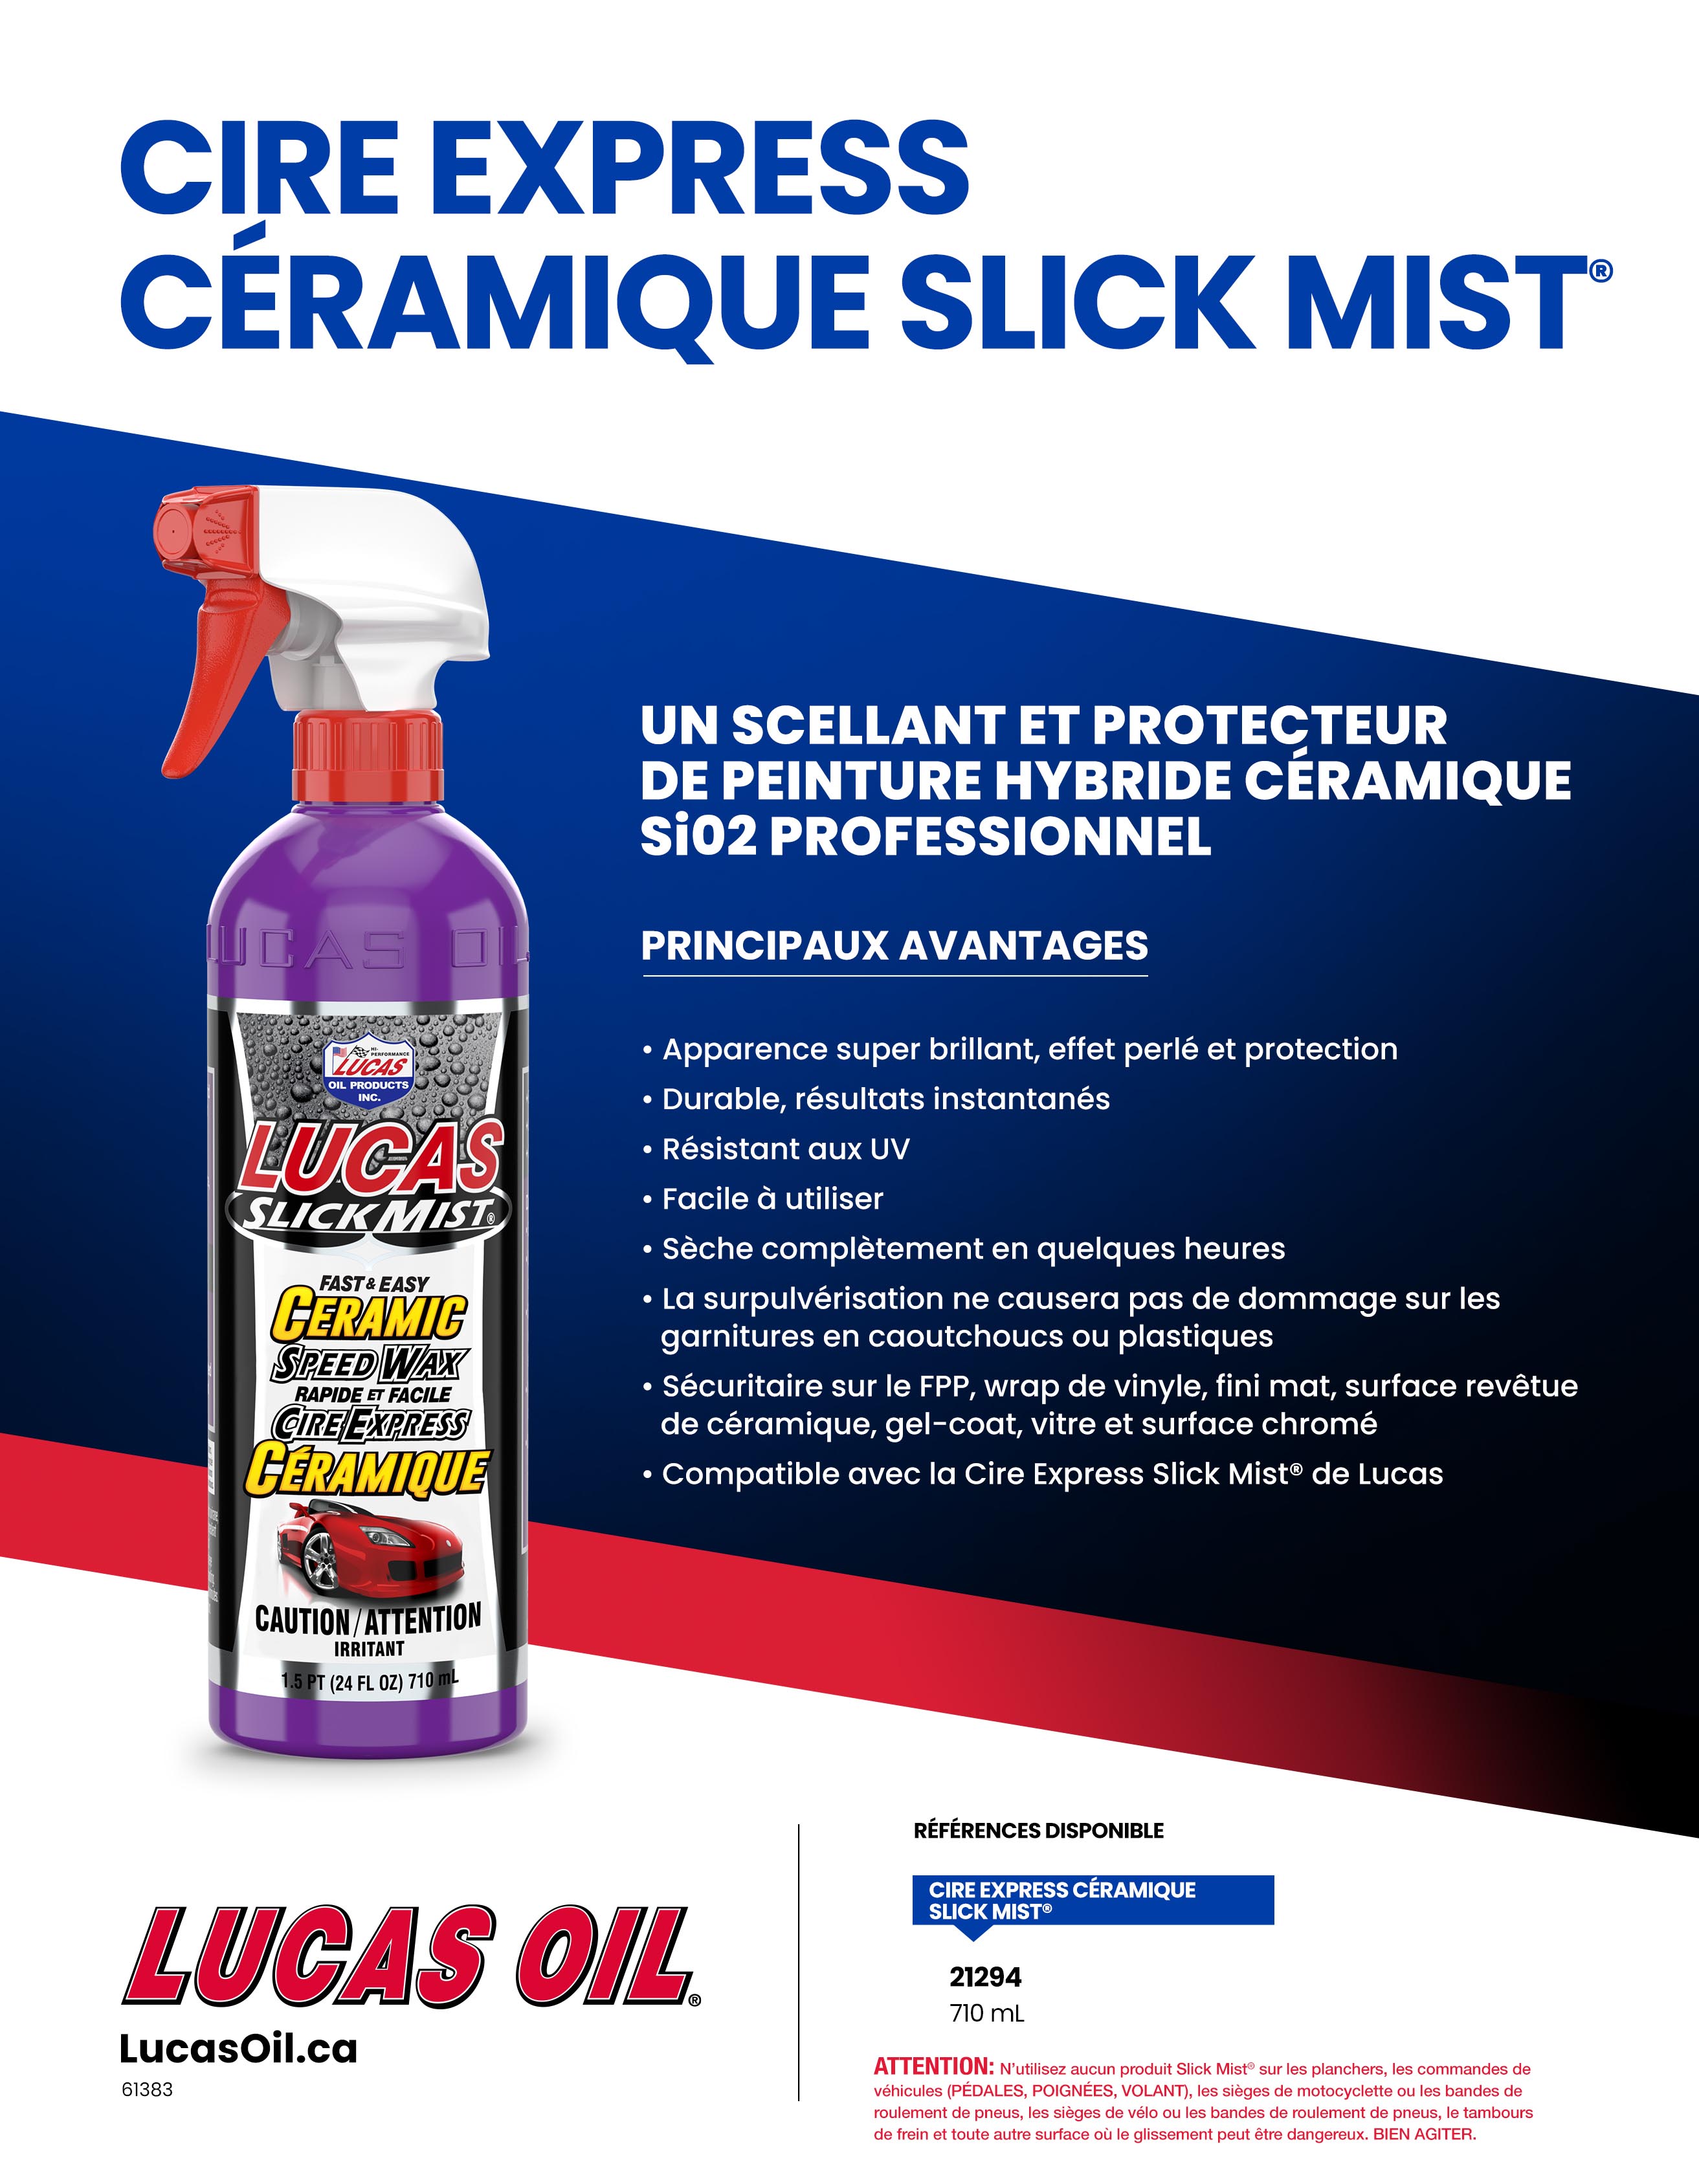 Introducing the NEW Lucas Slick Mist Ceramic Speed Wax and how to